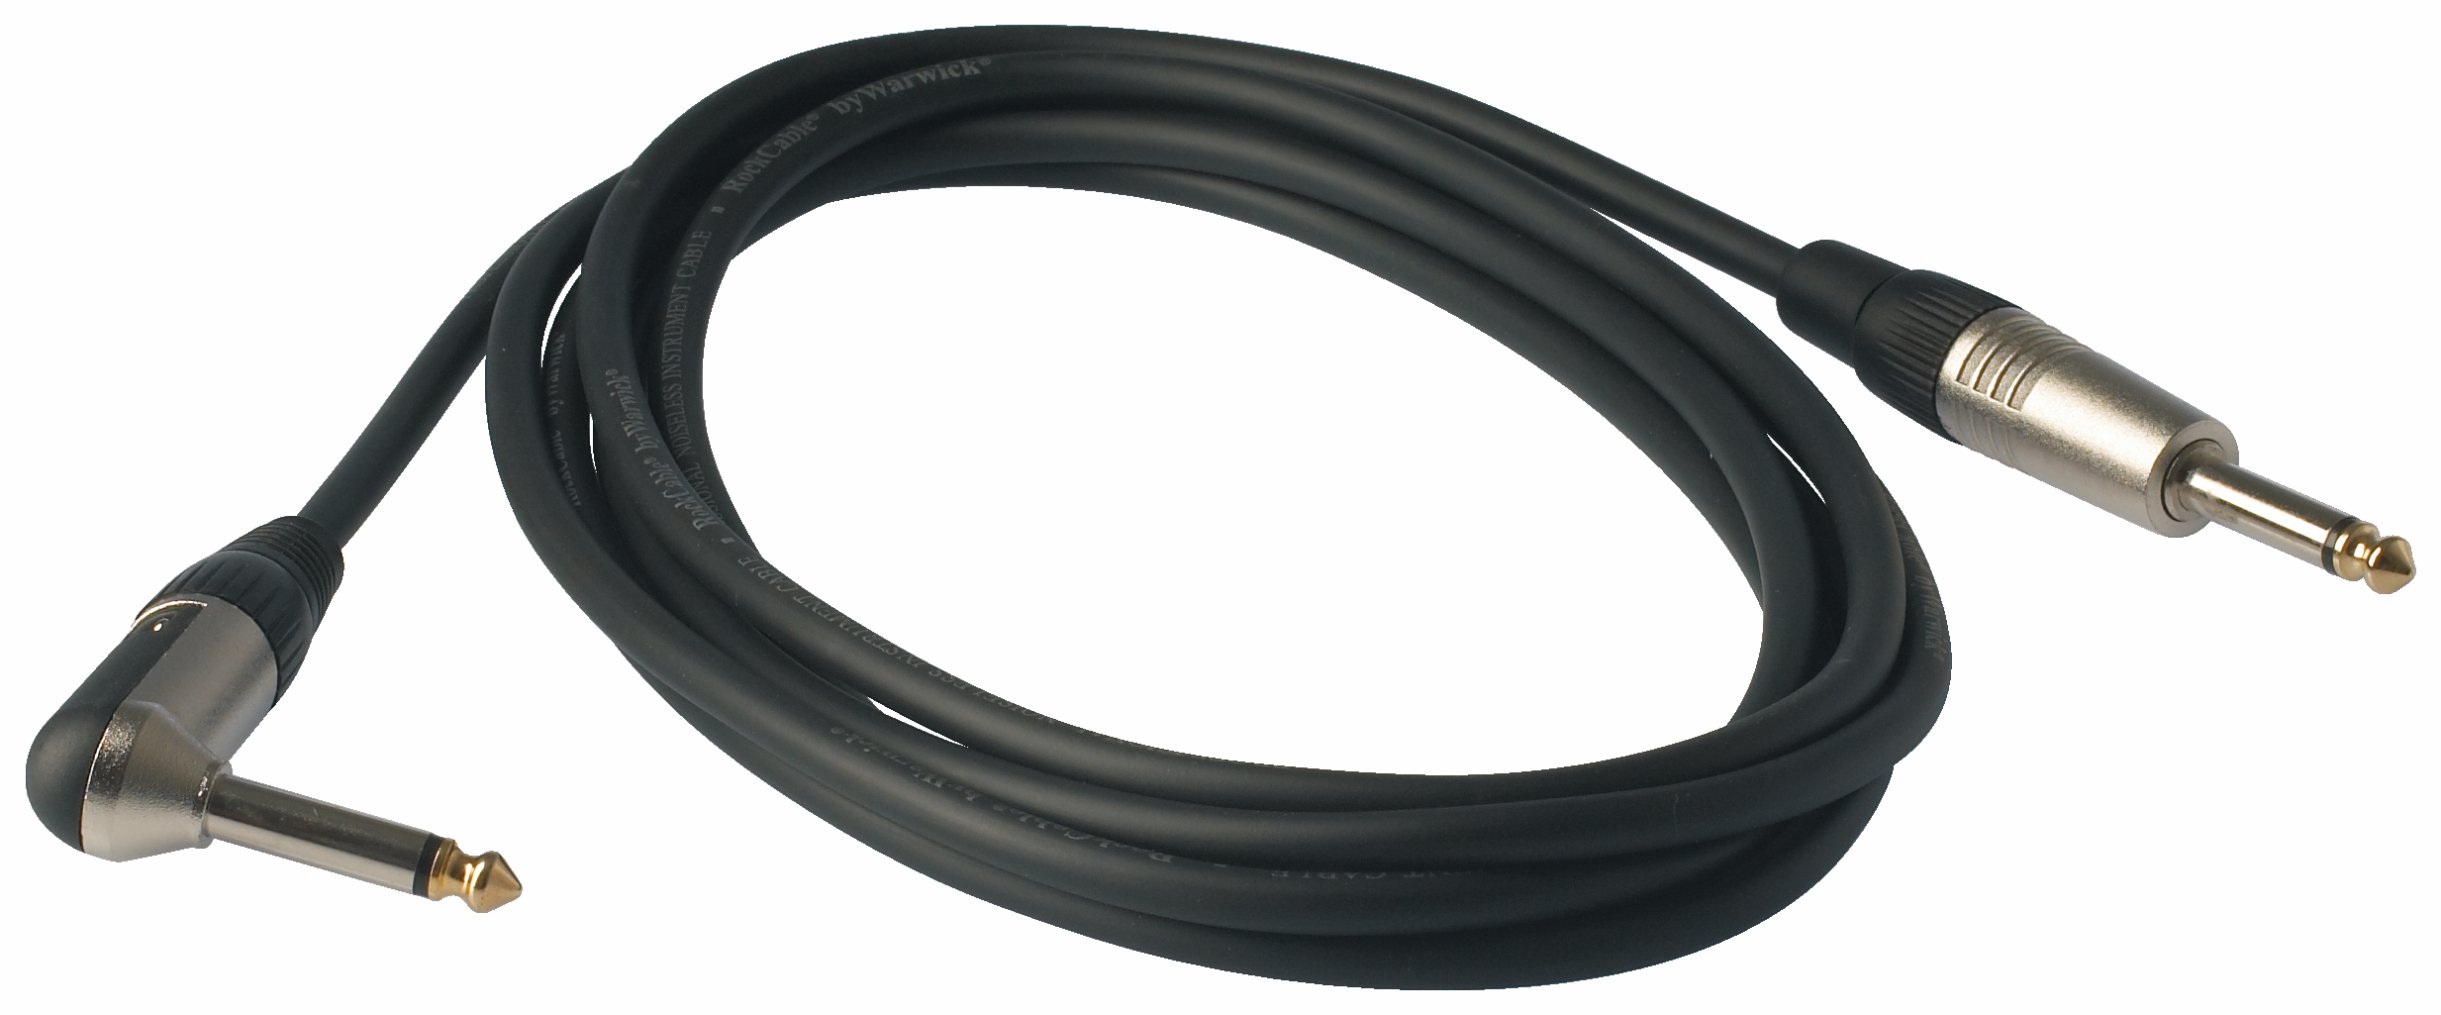 RockCable Instrument Cable - angled / straight TS (6.3 mm / 1/4"), 3 m / 9.8 ft - Black